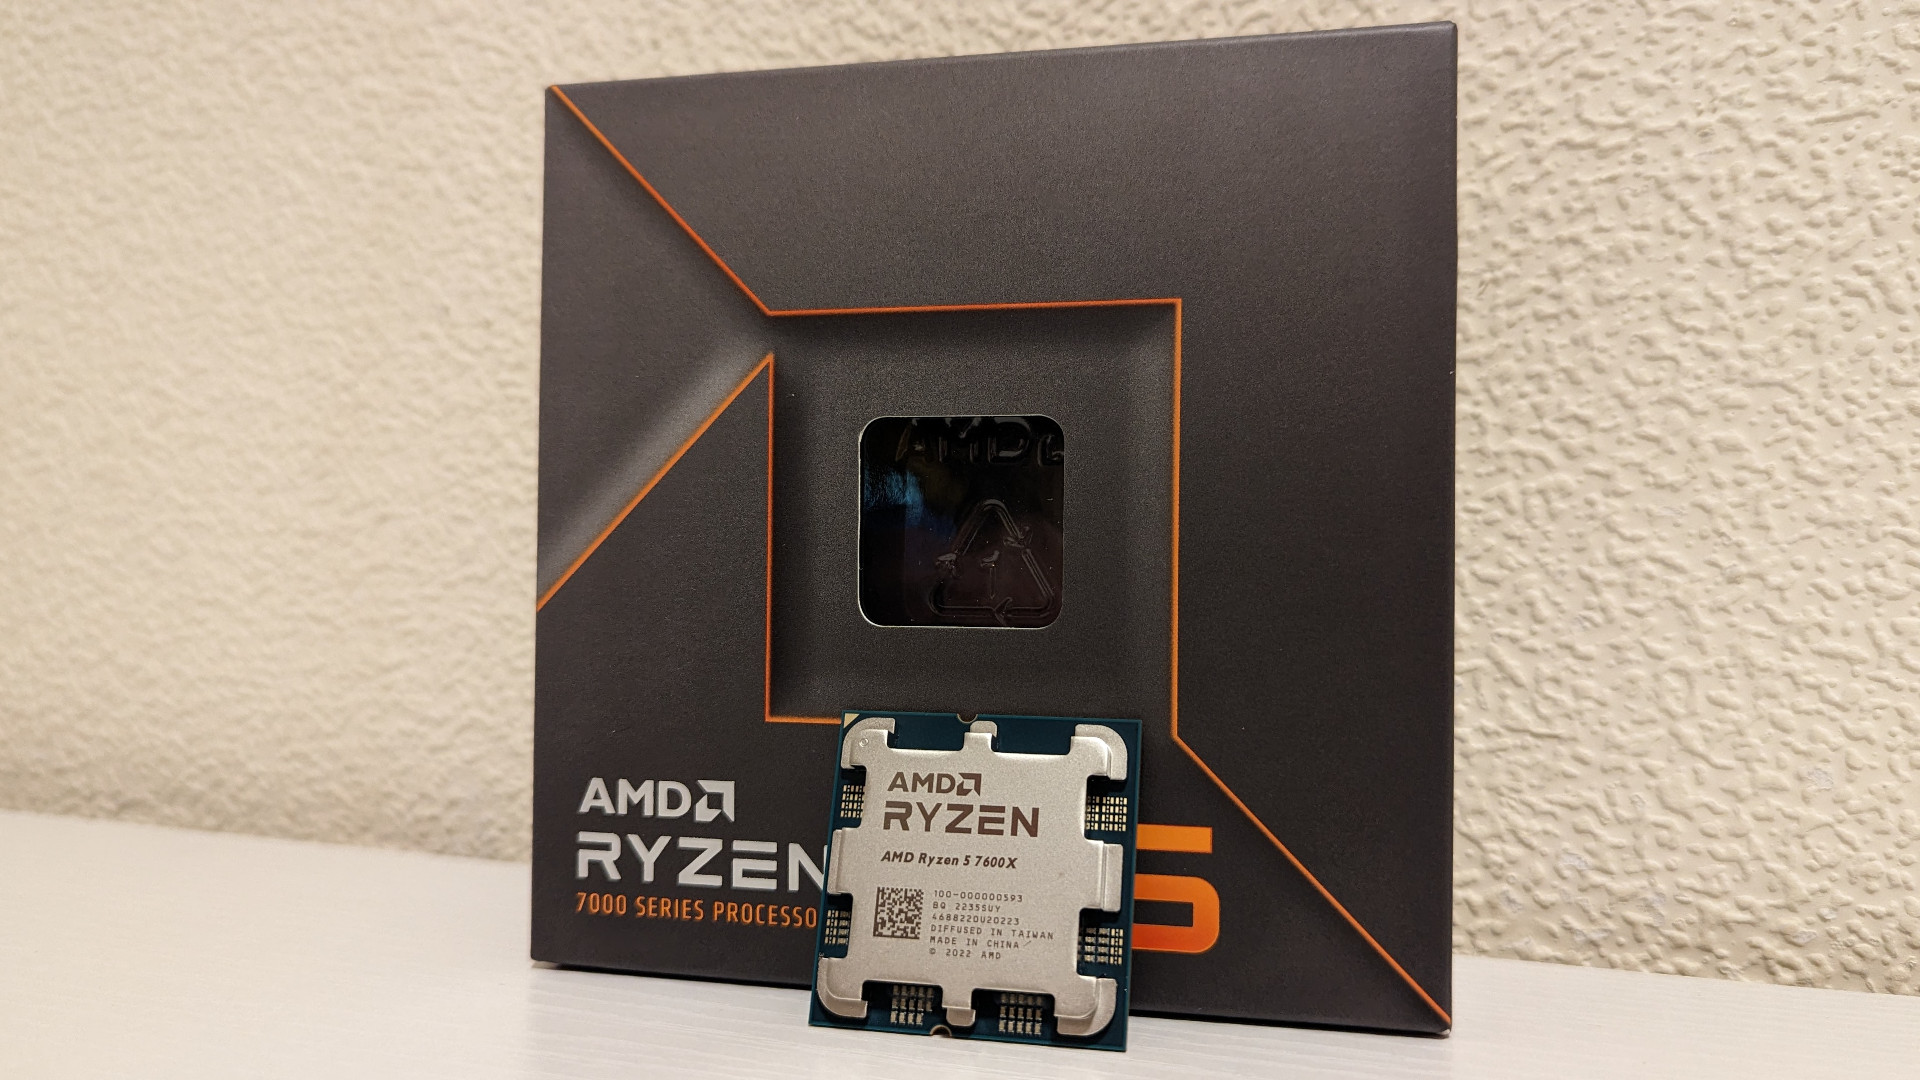 AMD Ryzen 5 7600 Review - Affordable Zen 4 for the Masses - Game Tests  1440p / RTX 3080